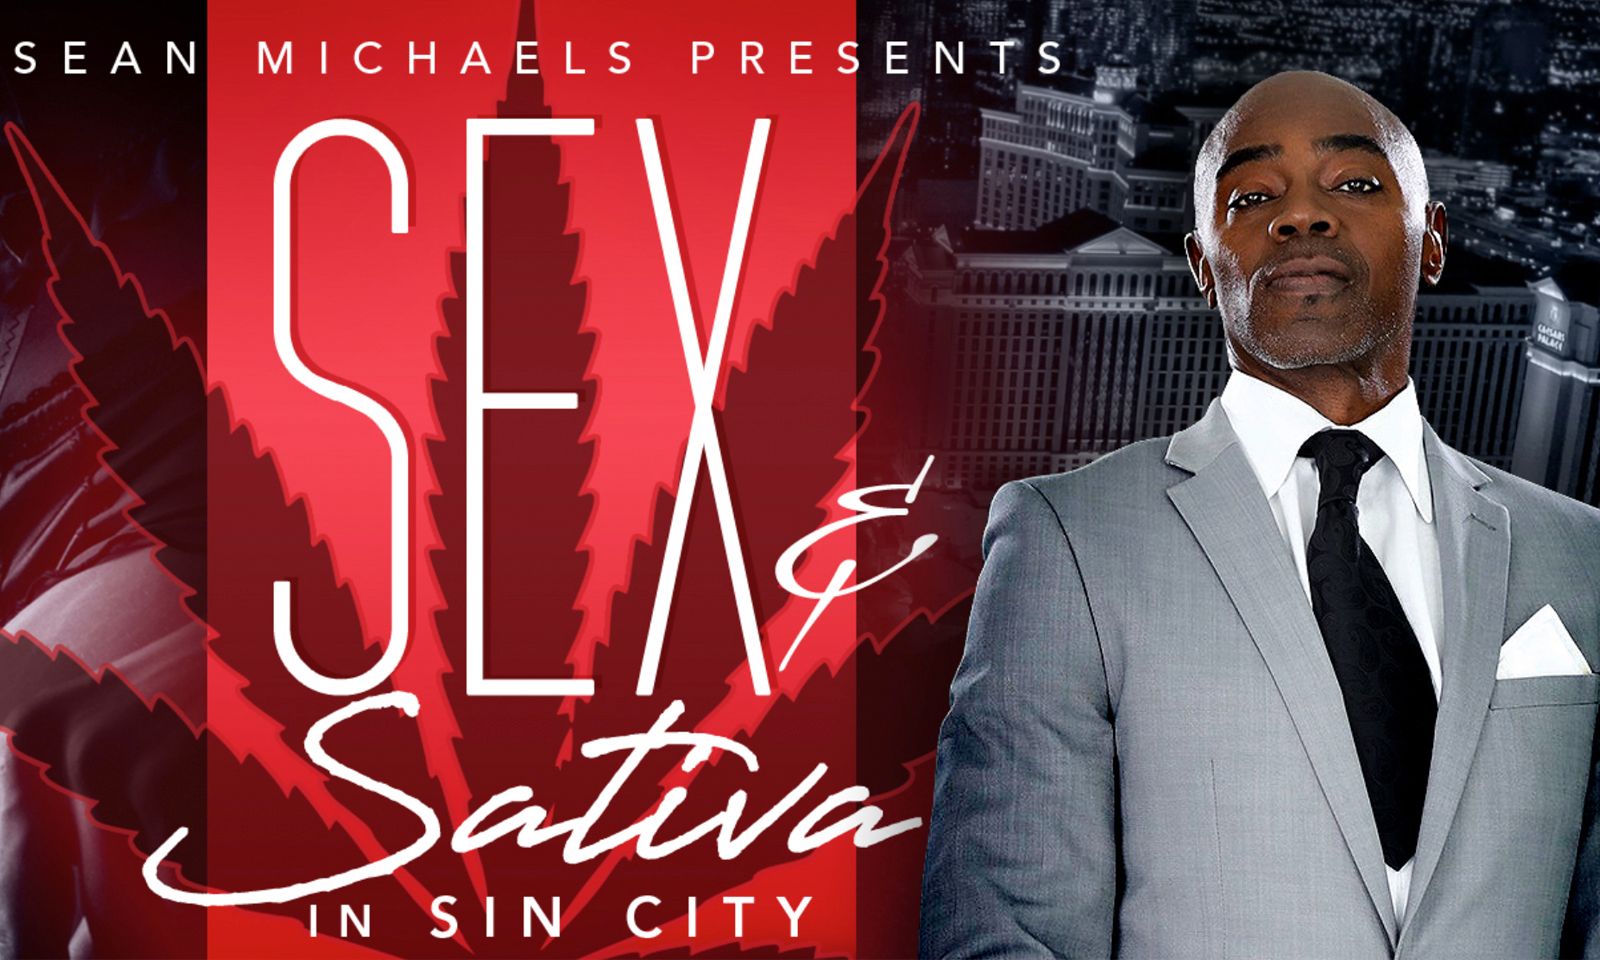 Sponsorships Available For Sean Michaels’ Cannabis Events